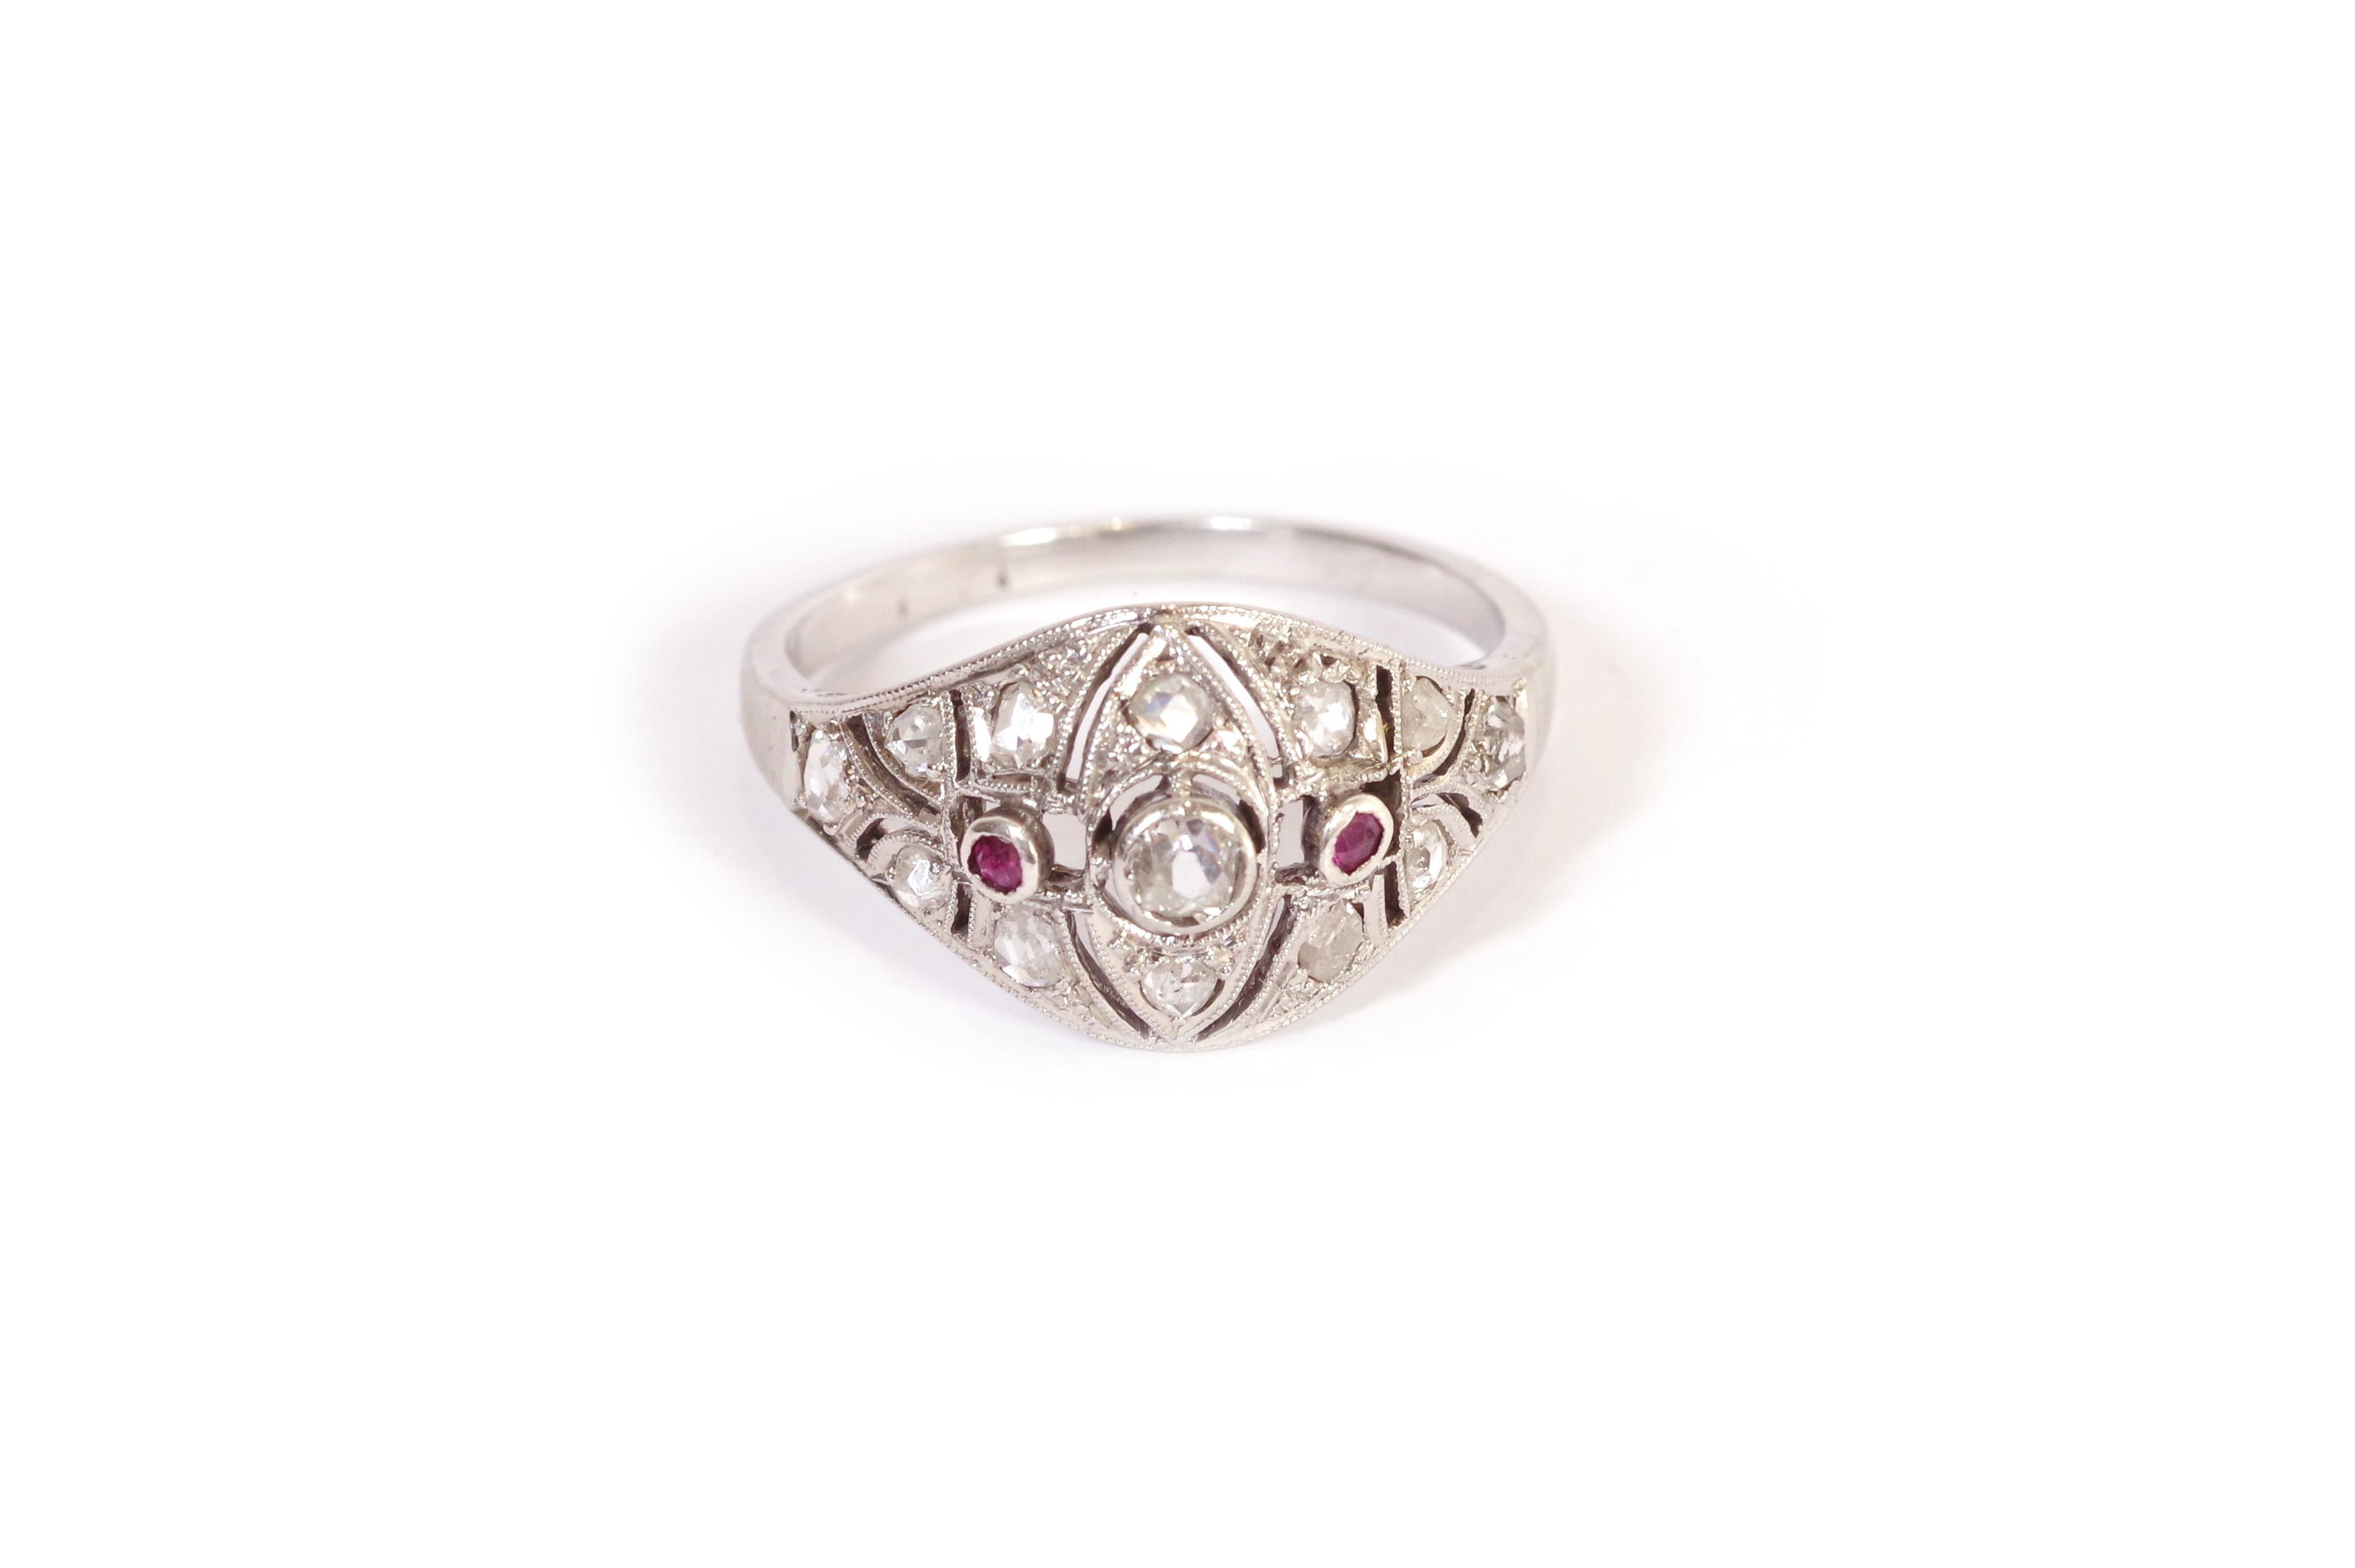 Art Deco diamonds ruby ring in 18-karat white gold. Ring set with 13 rose-cut diamonds and two small round rubies. The central diamond is an old cut and weighs approximately 0.05 carats. The structure of the ring is openwork. Art Deco ring, circa